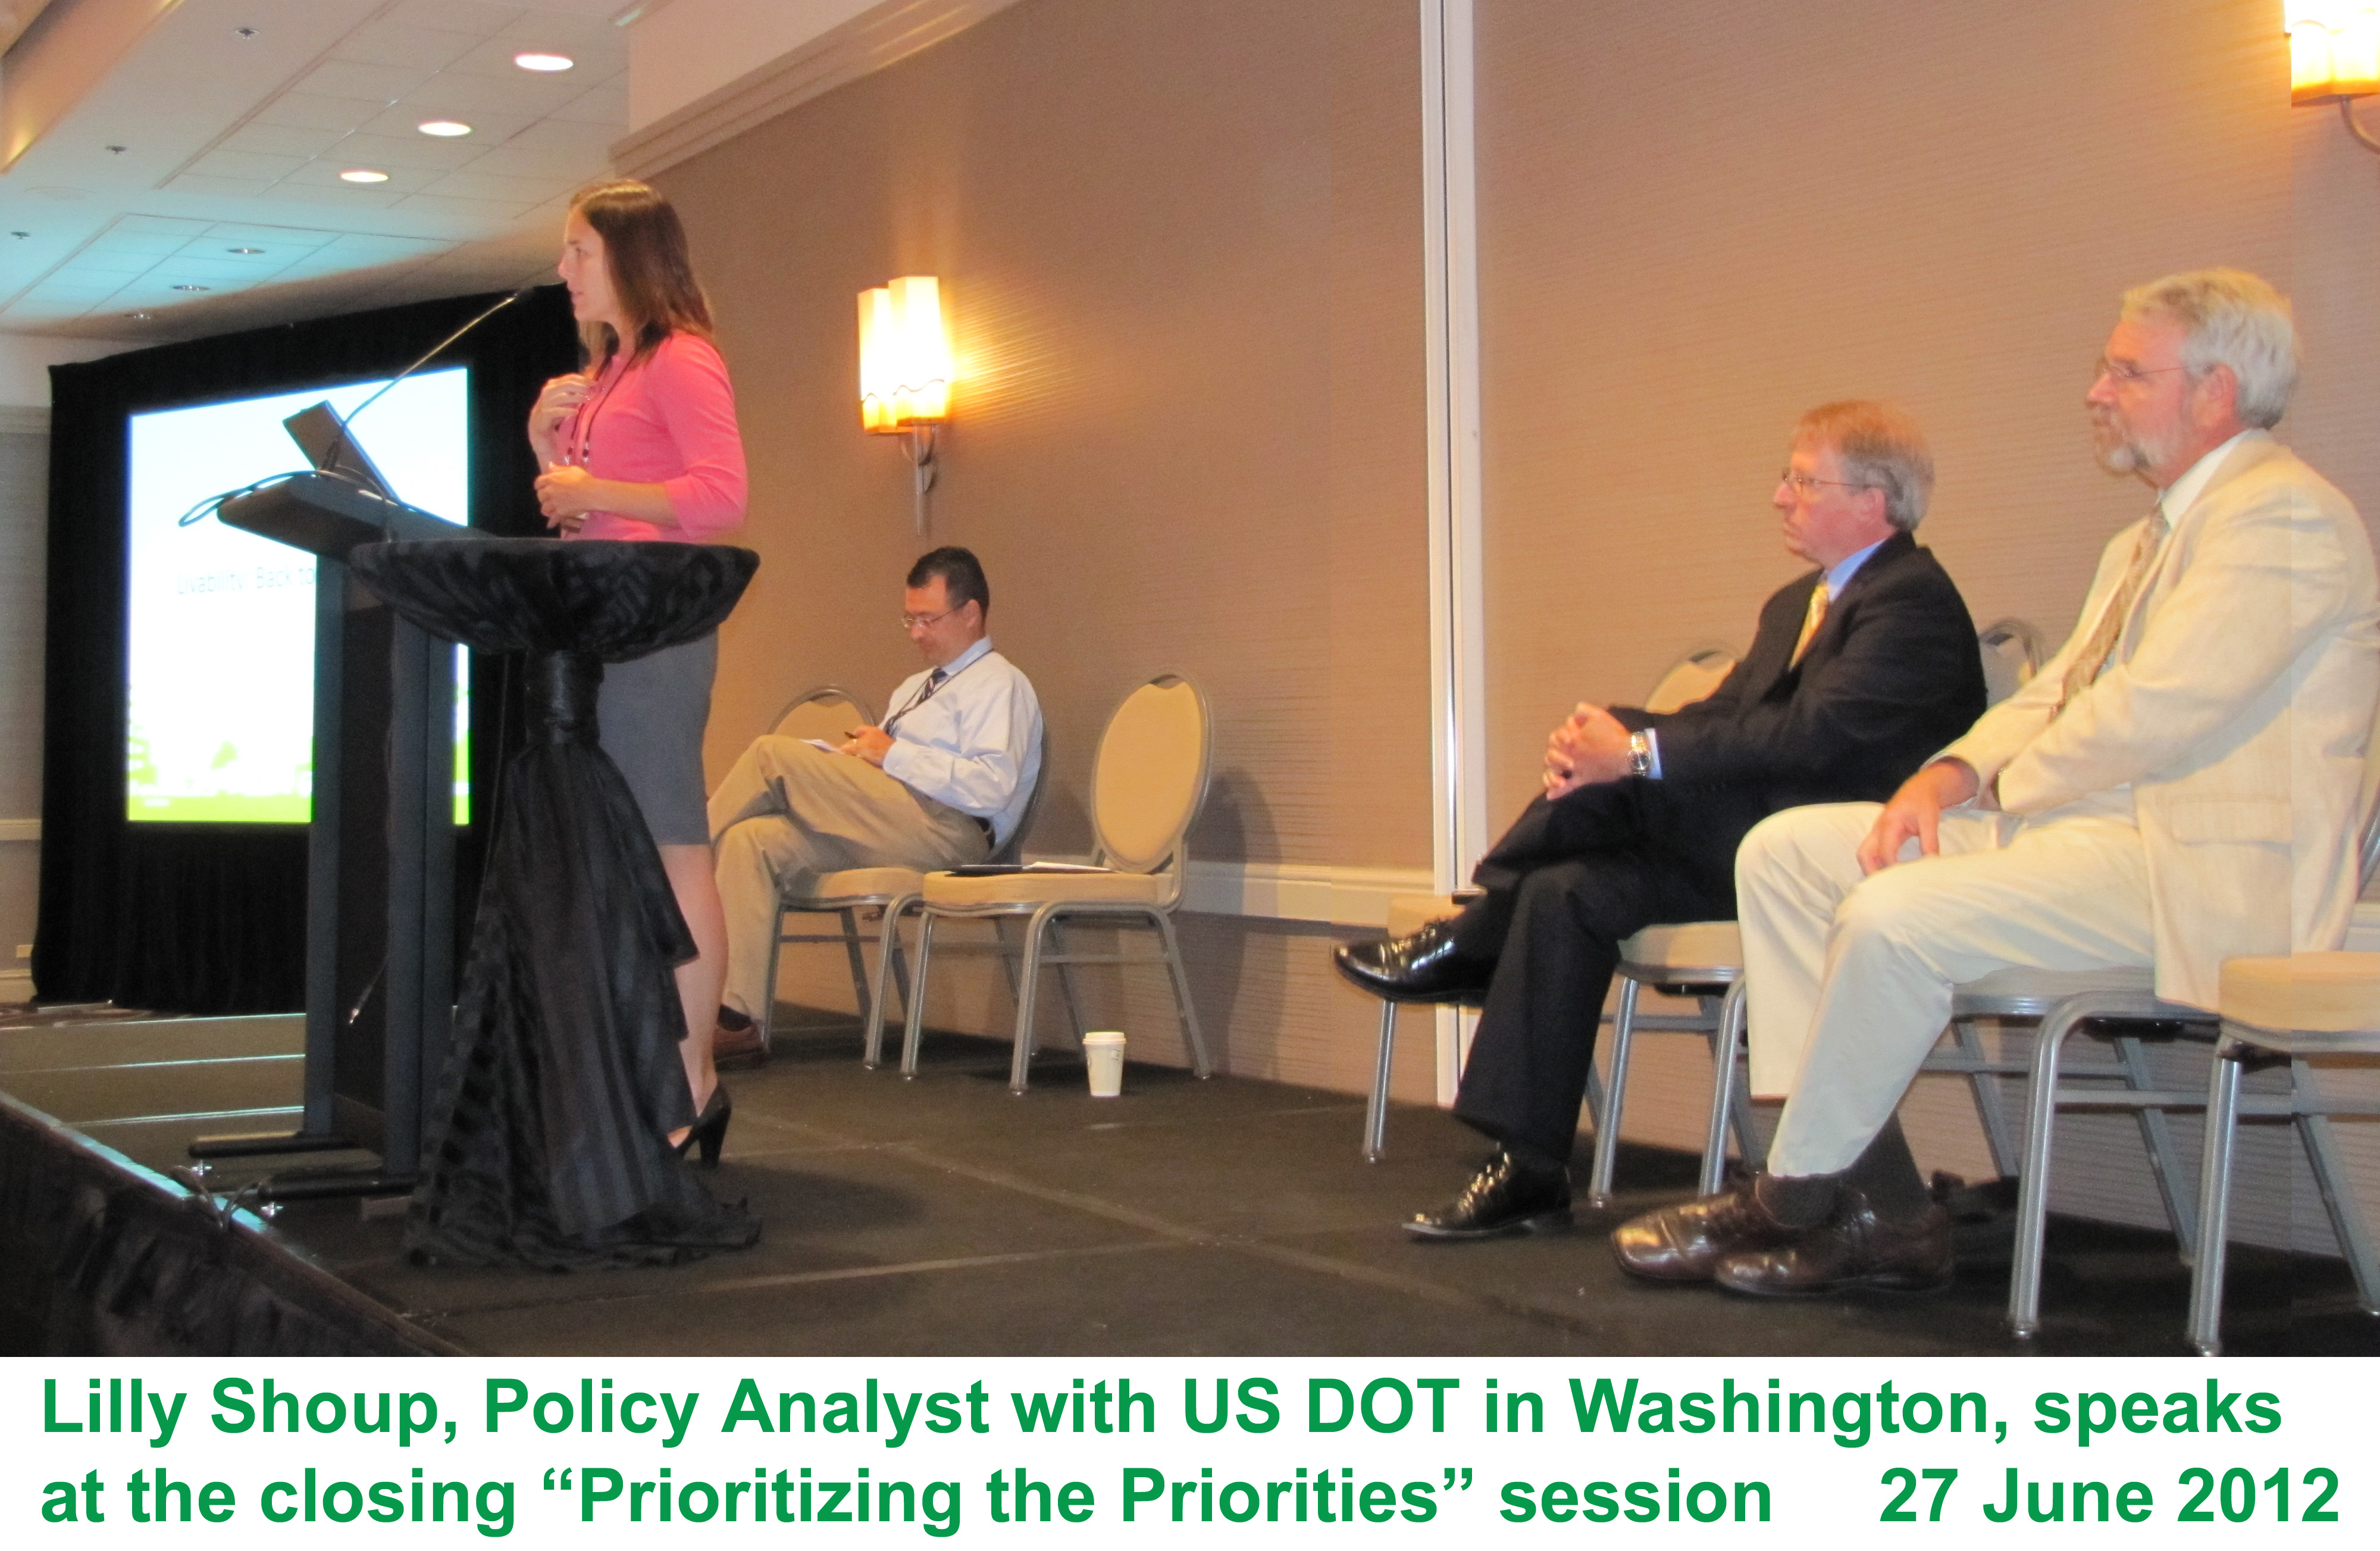 4th Urban Street Symposium: Lilly Shoup, Policy Analyst with US DOT in Washington, speaks at the closing 'Prioritizing the Priorities' session on June 27